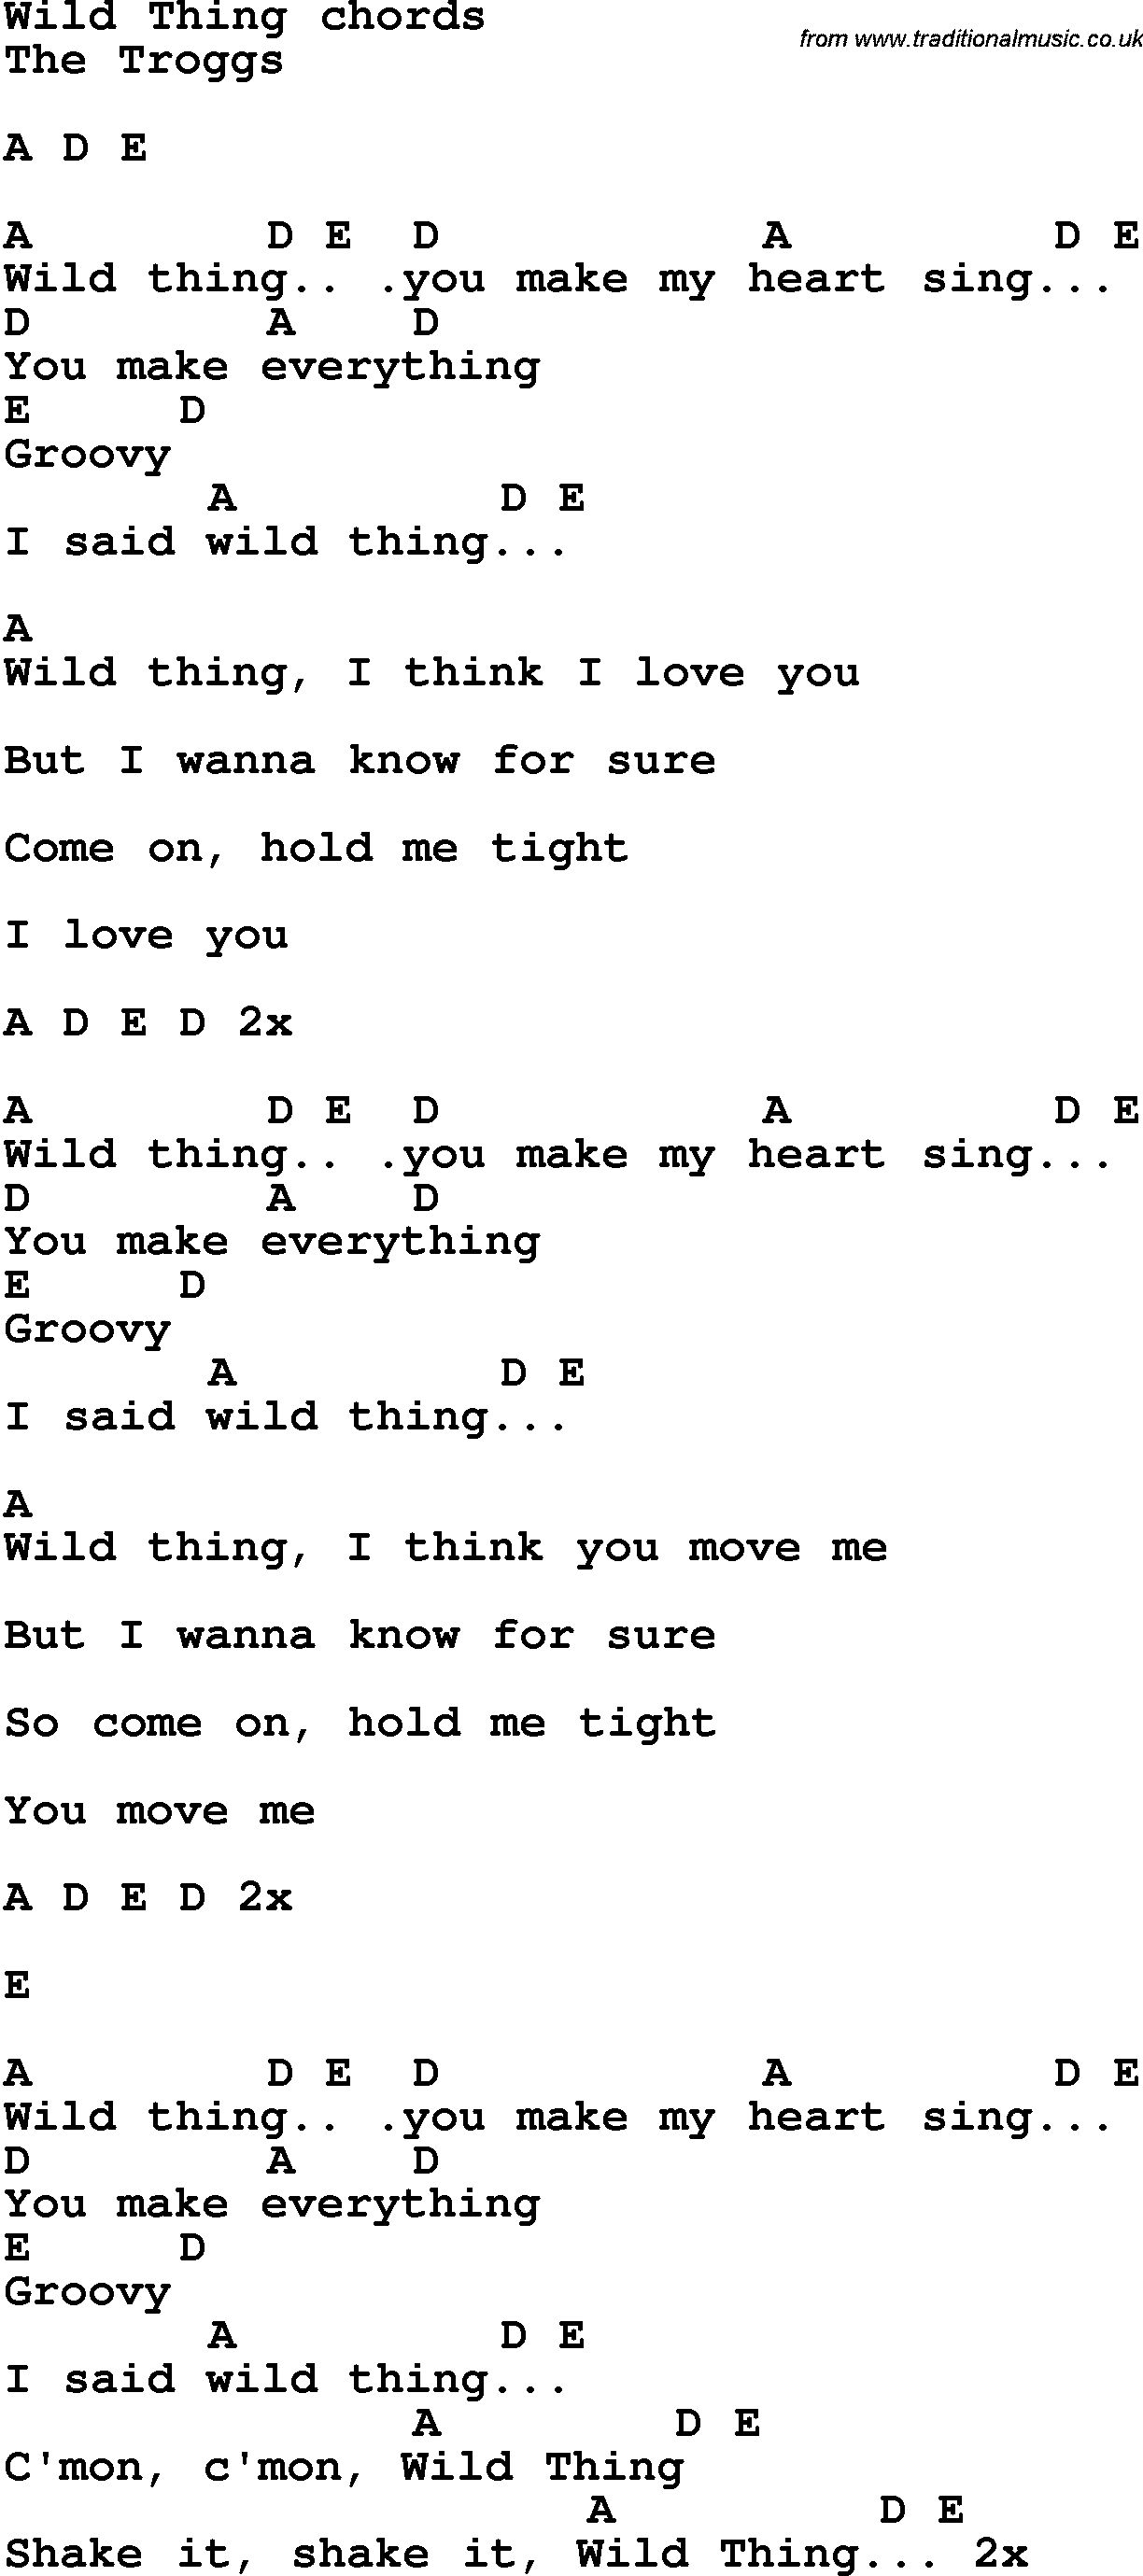 Song Lyrics with guitar chords for Wild Thing